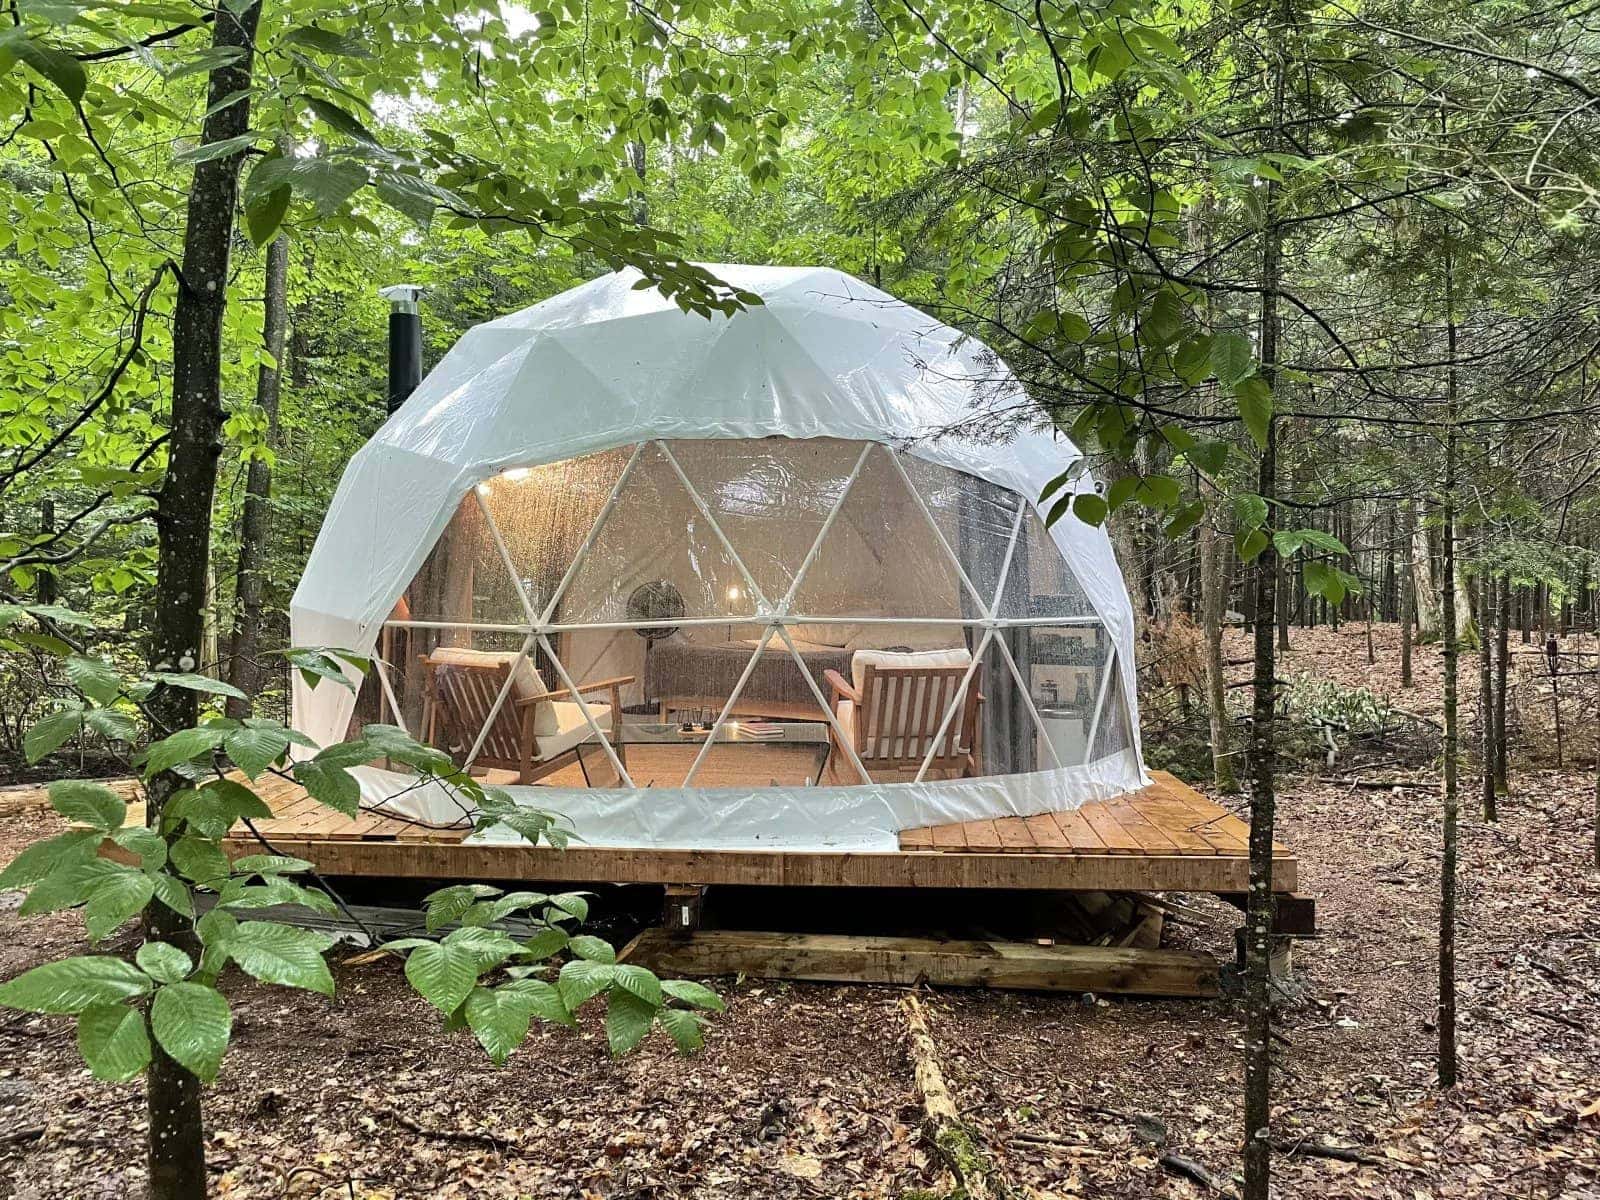 The Canopy Geodesic Dome